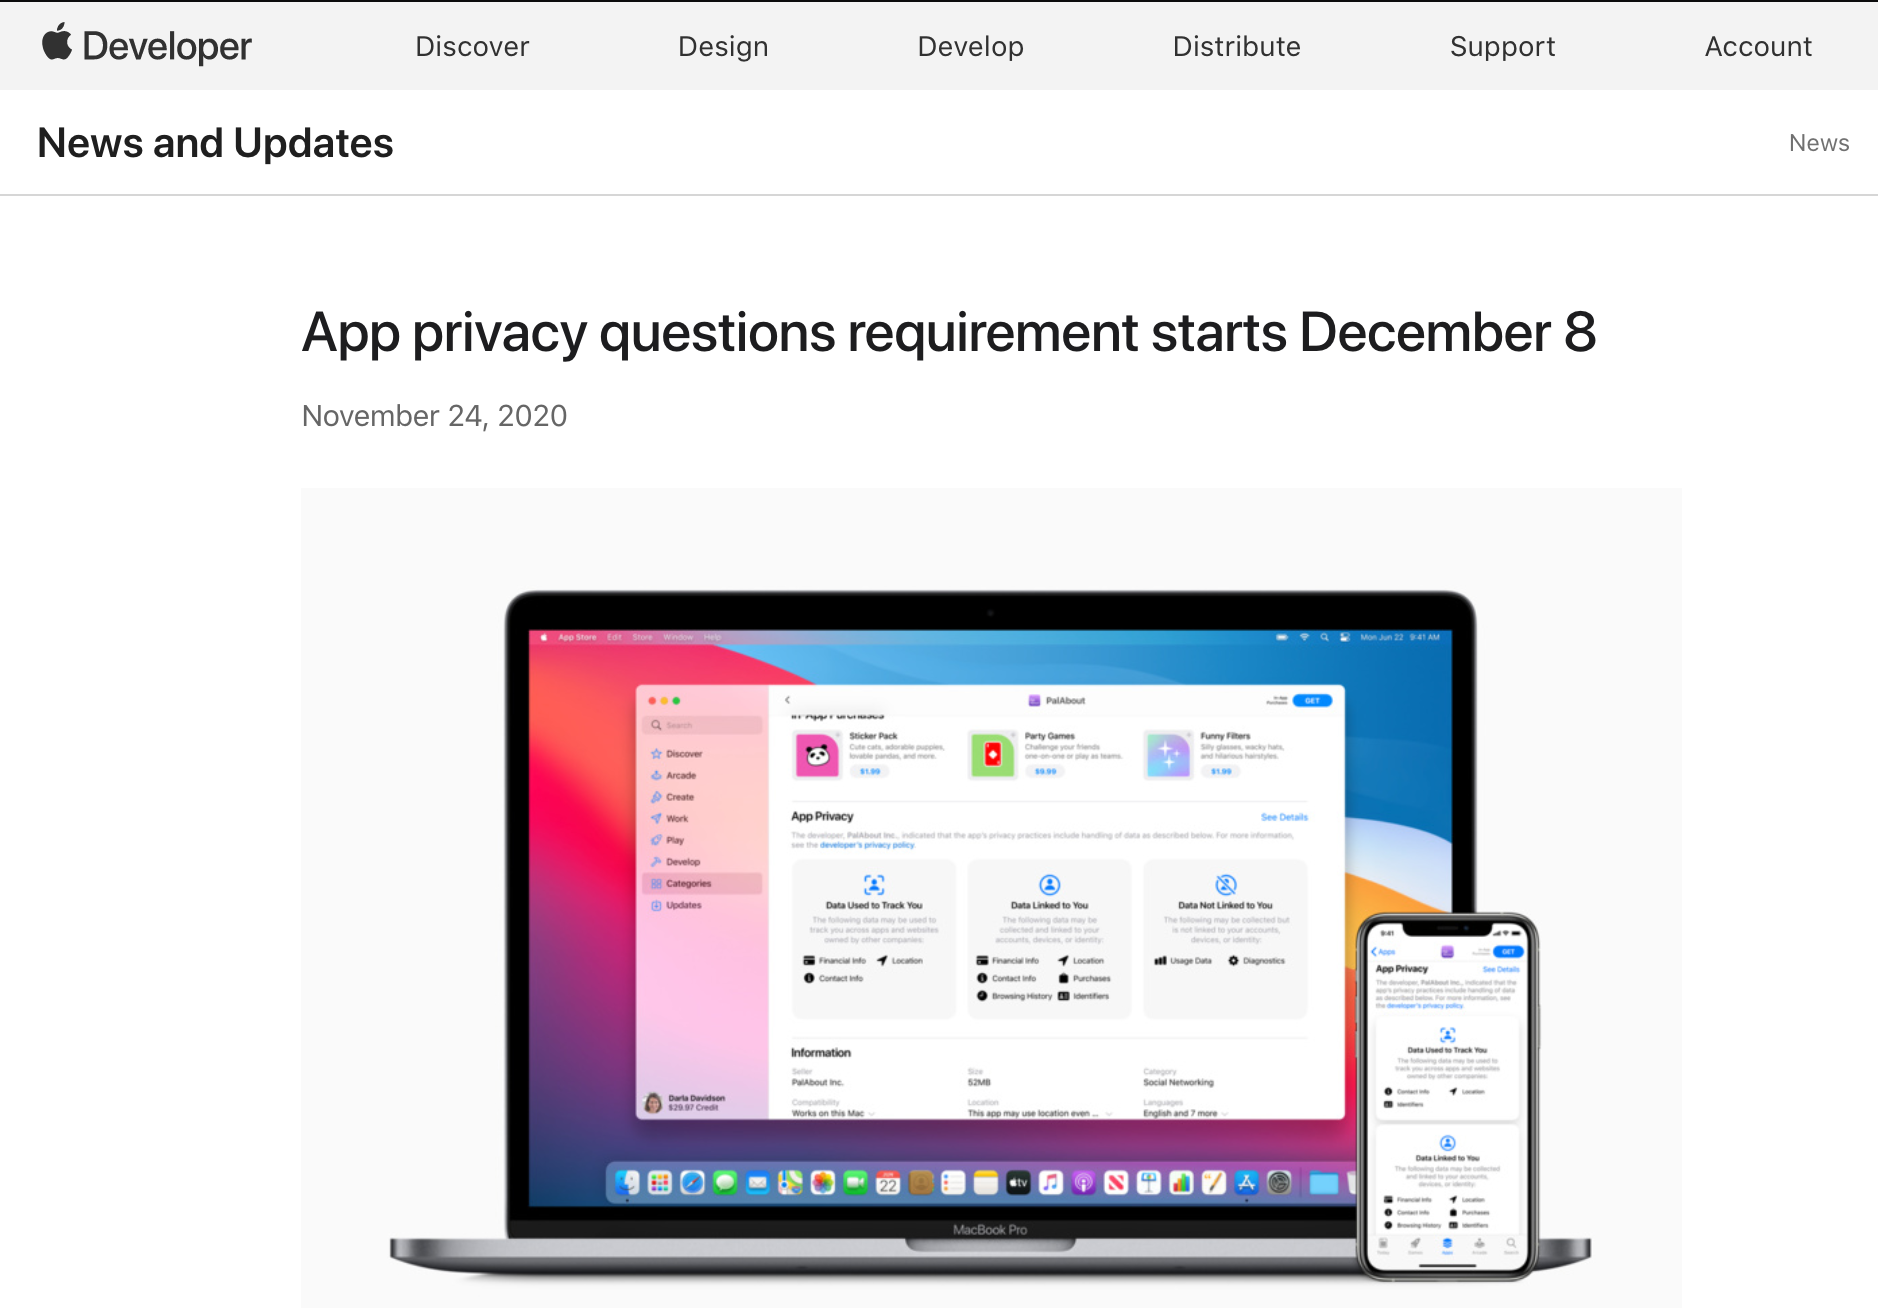 App privacy questions requirement starts December 8